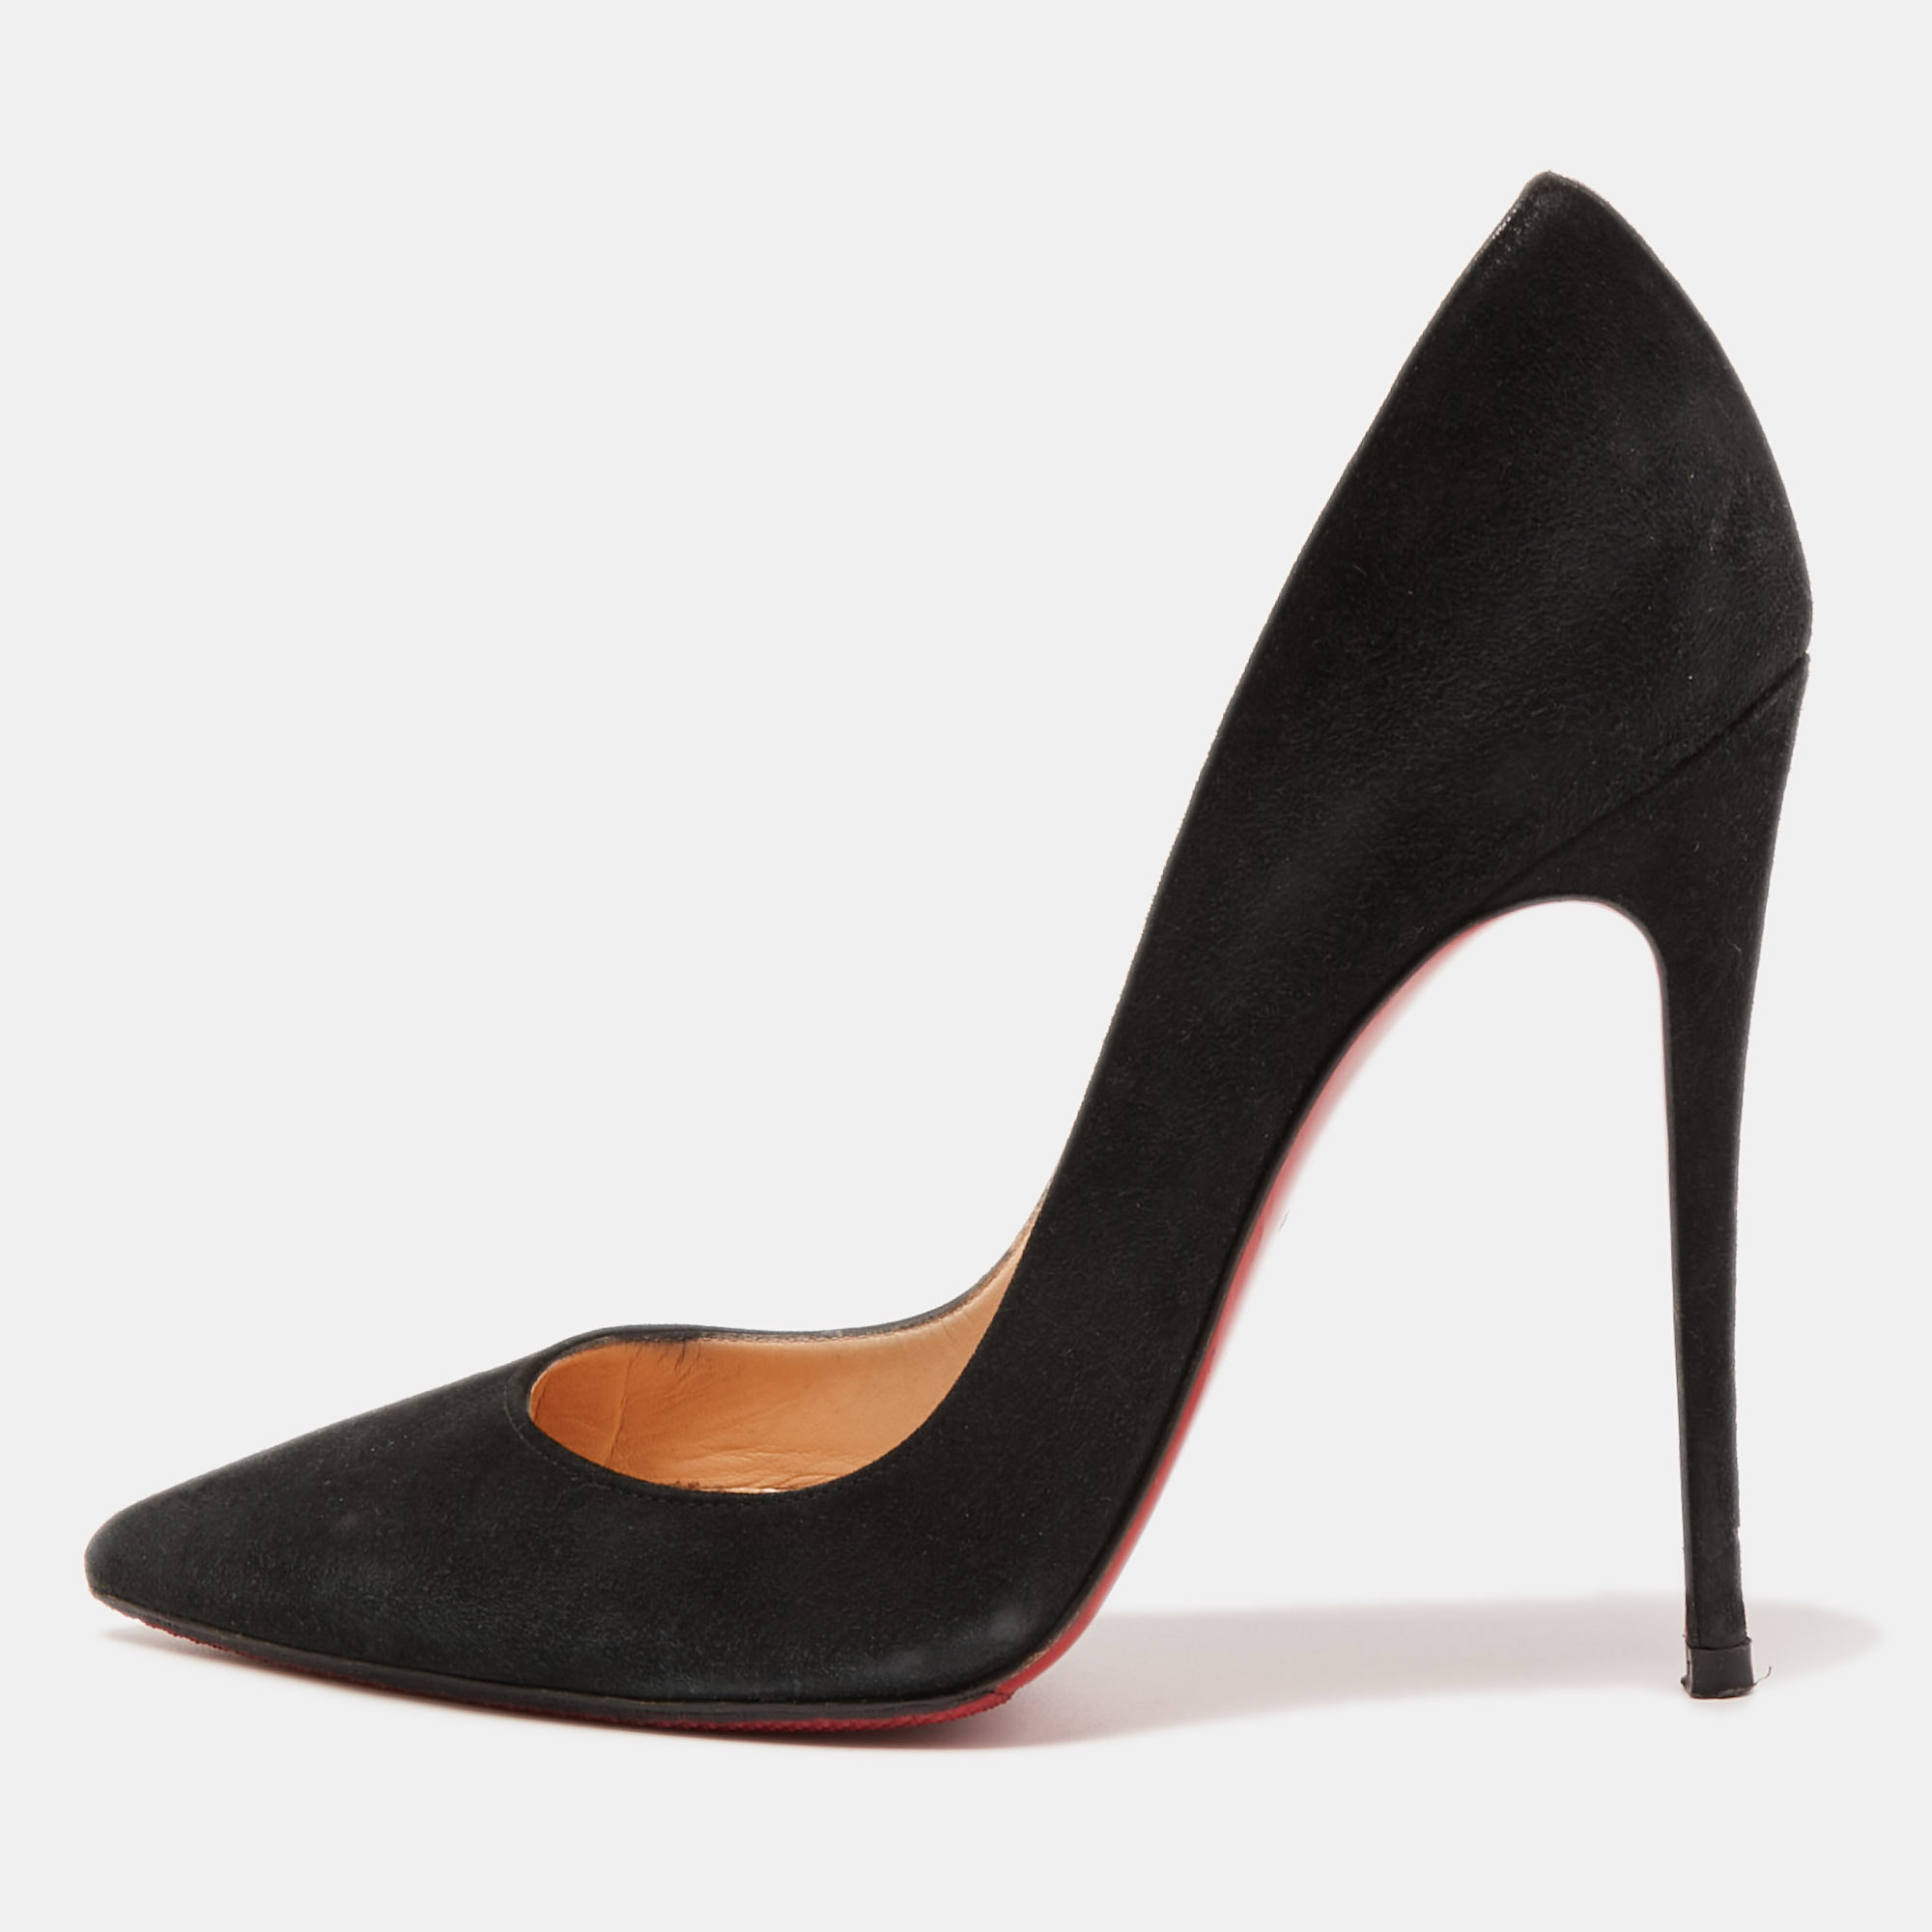 Pre-owned Christian Louboutin Black Suede So Kate Pumps Size 38